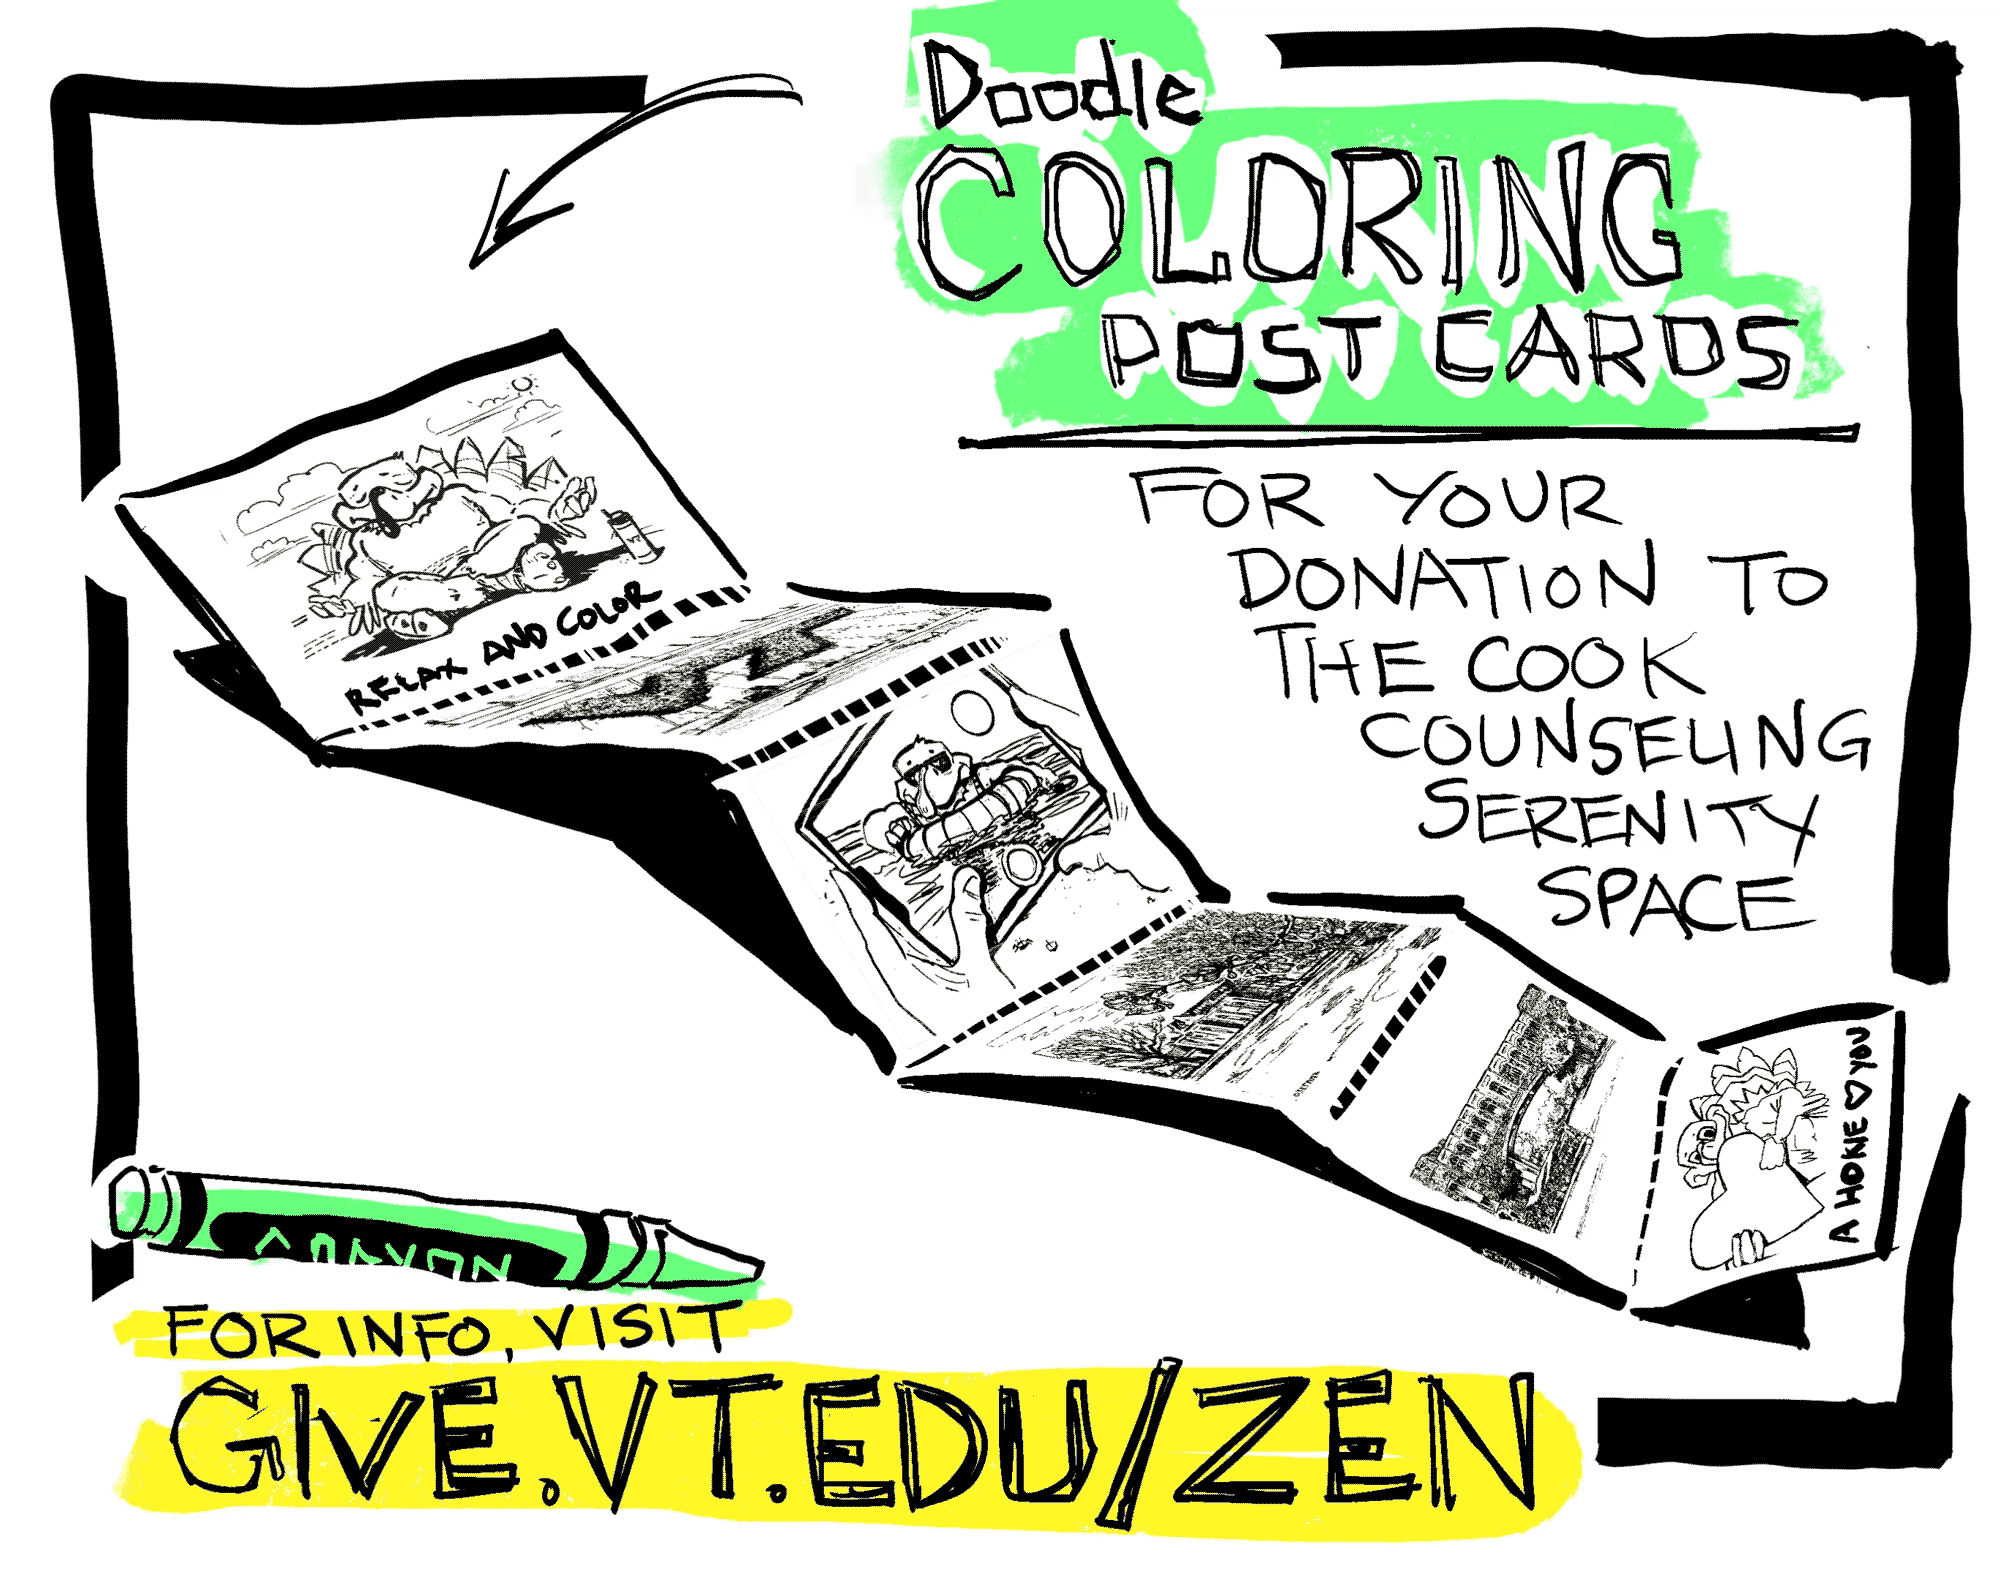 Animated digital sketch of post cards available to donors who support the serenity space campaign with Cook Counseling